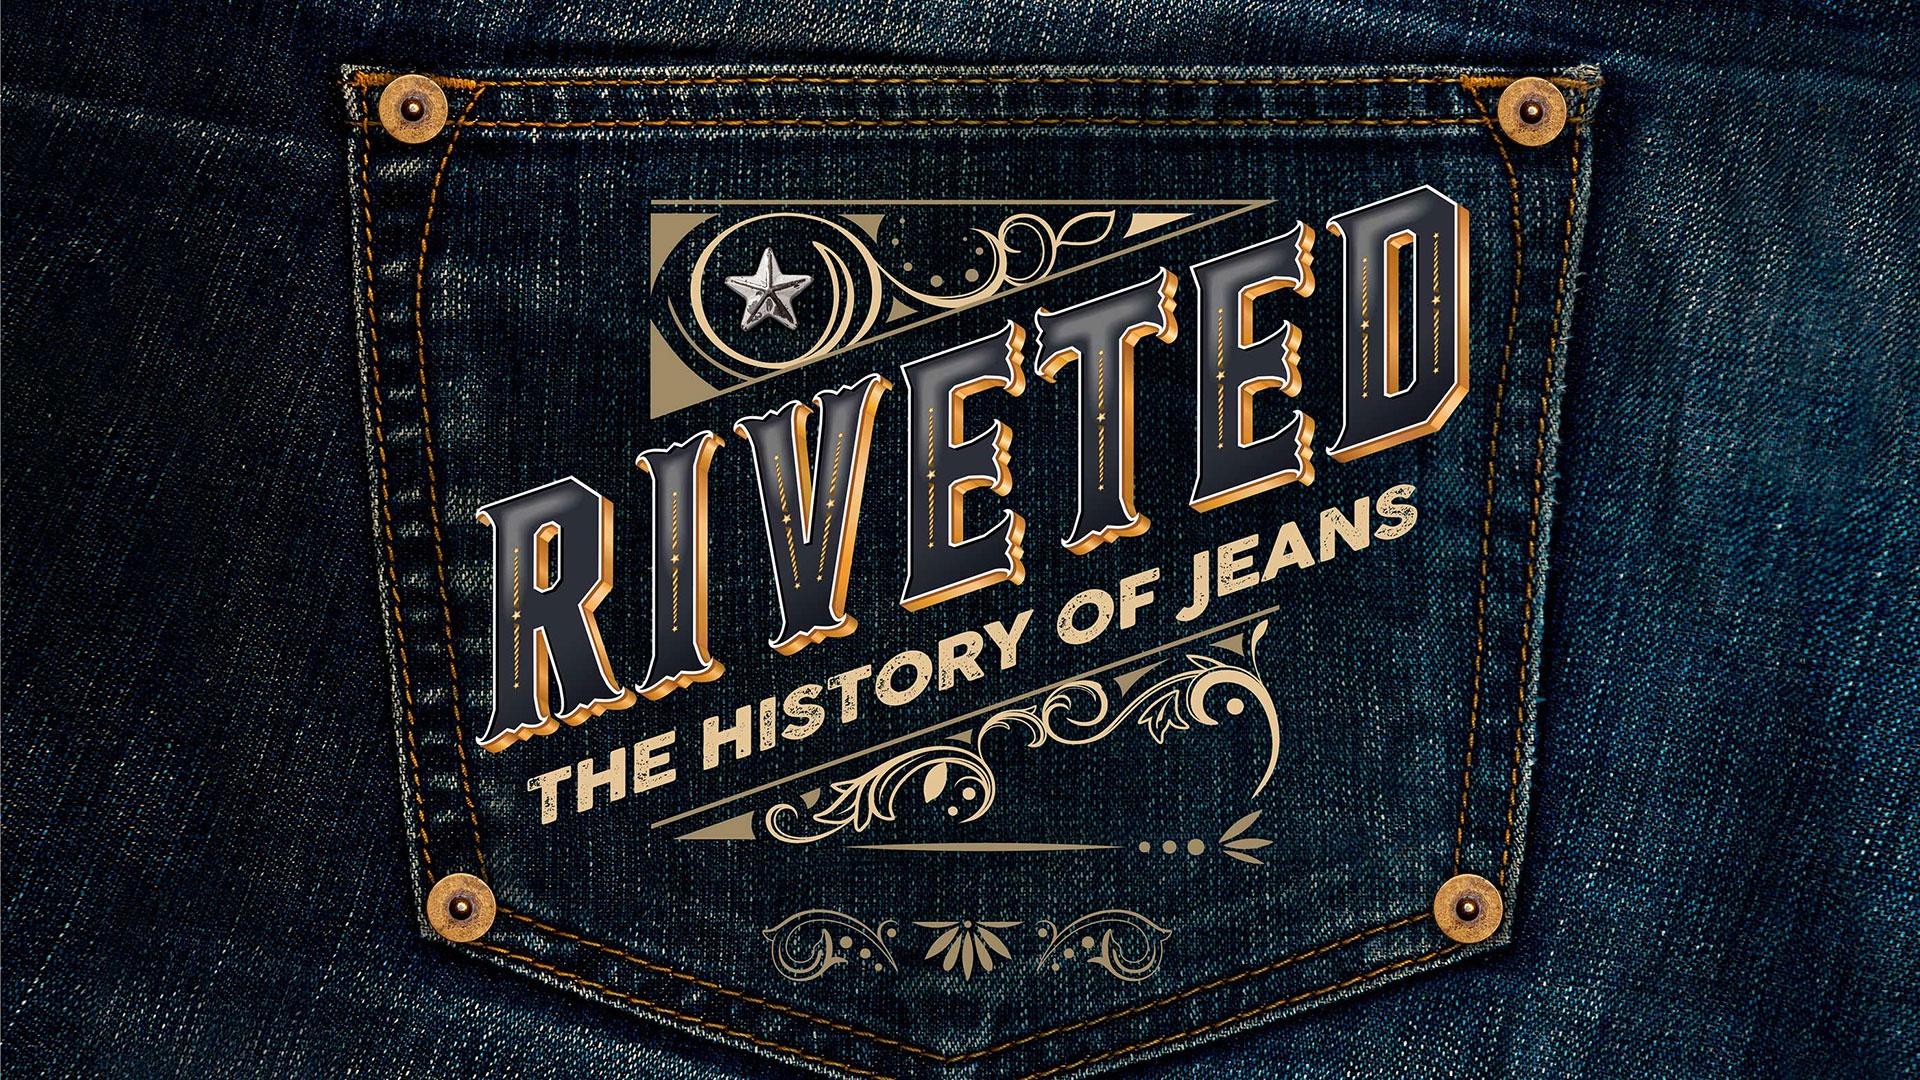 Riveted: The History of Jeans